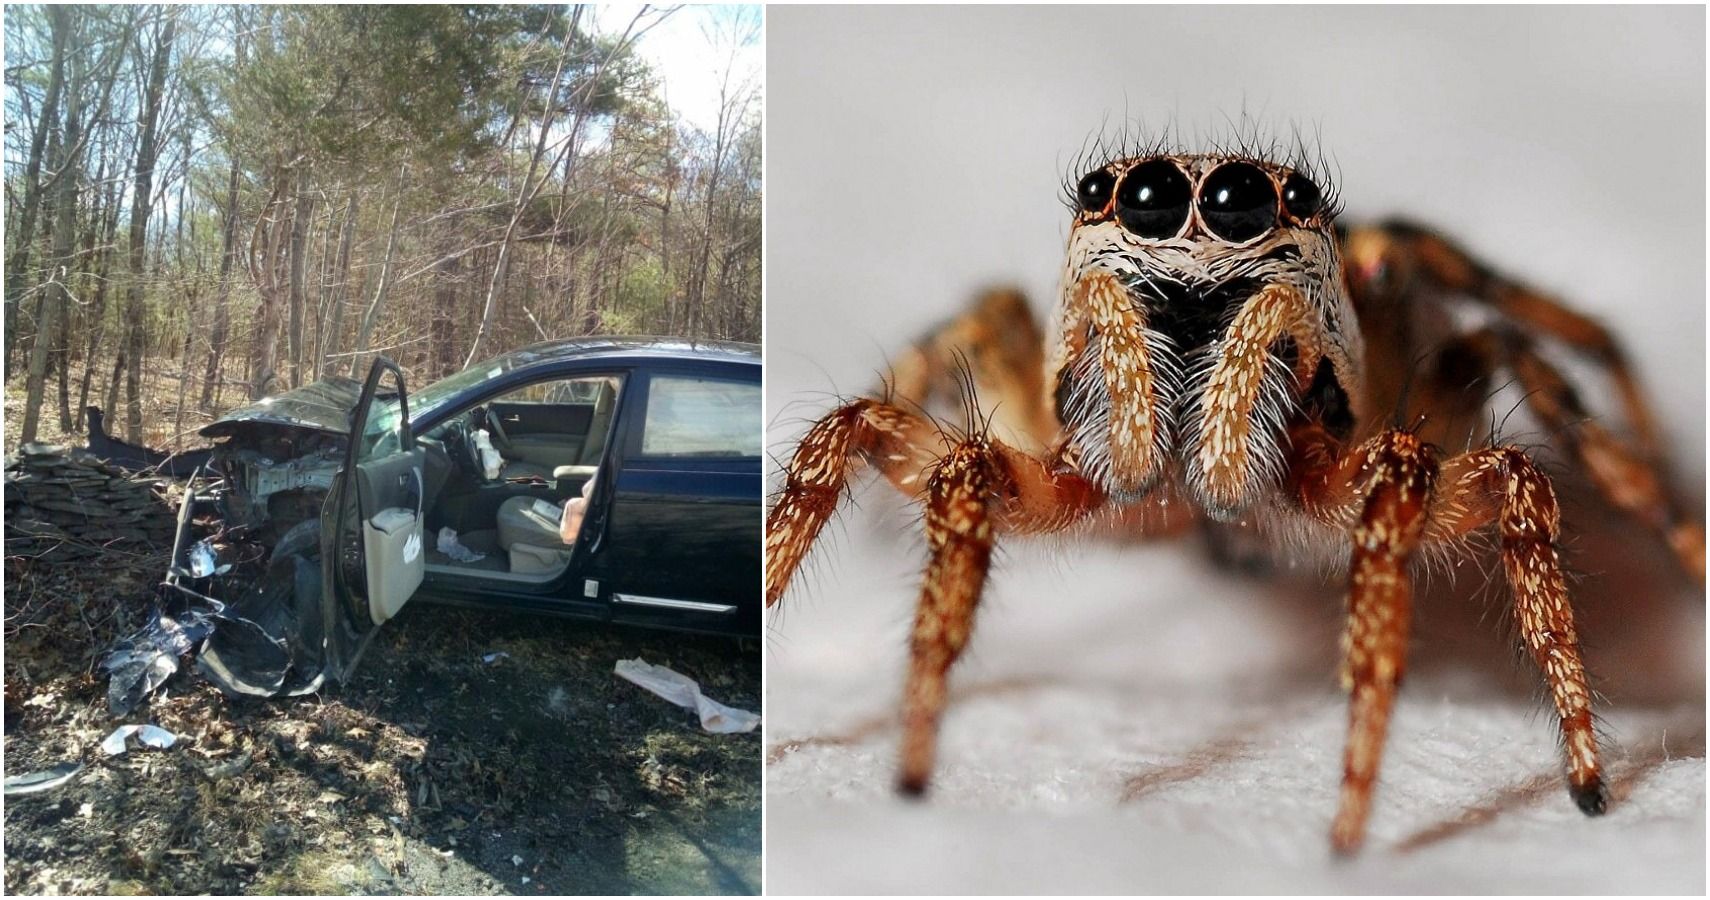 Woman Decides It Is Better To Crash Than Share A Vehicle With A Spider